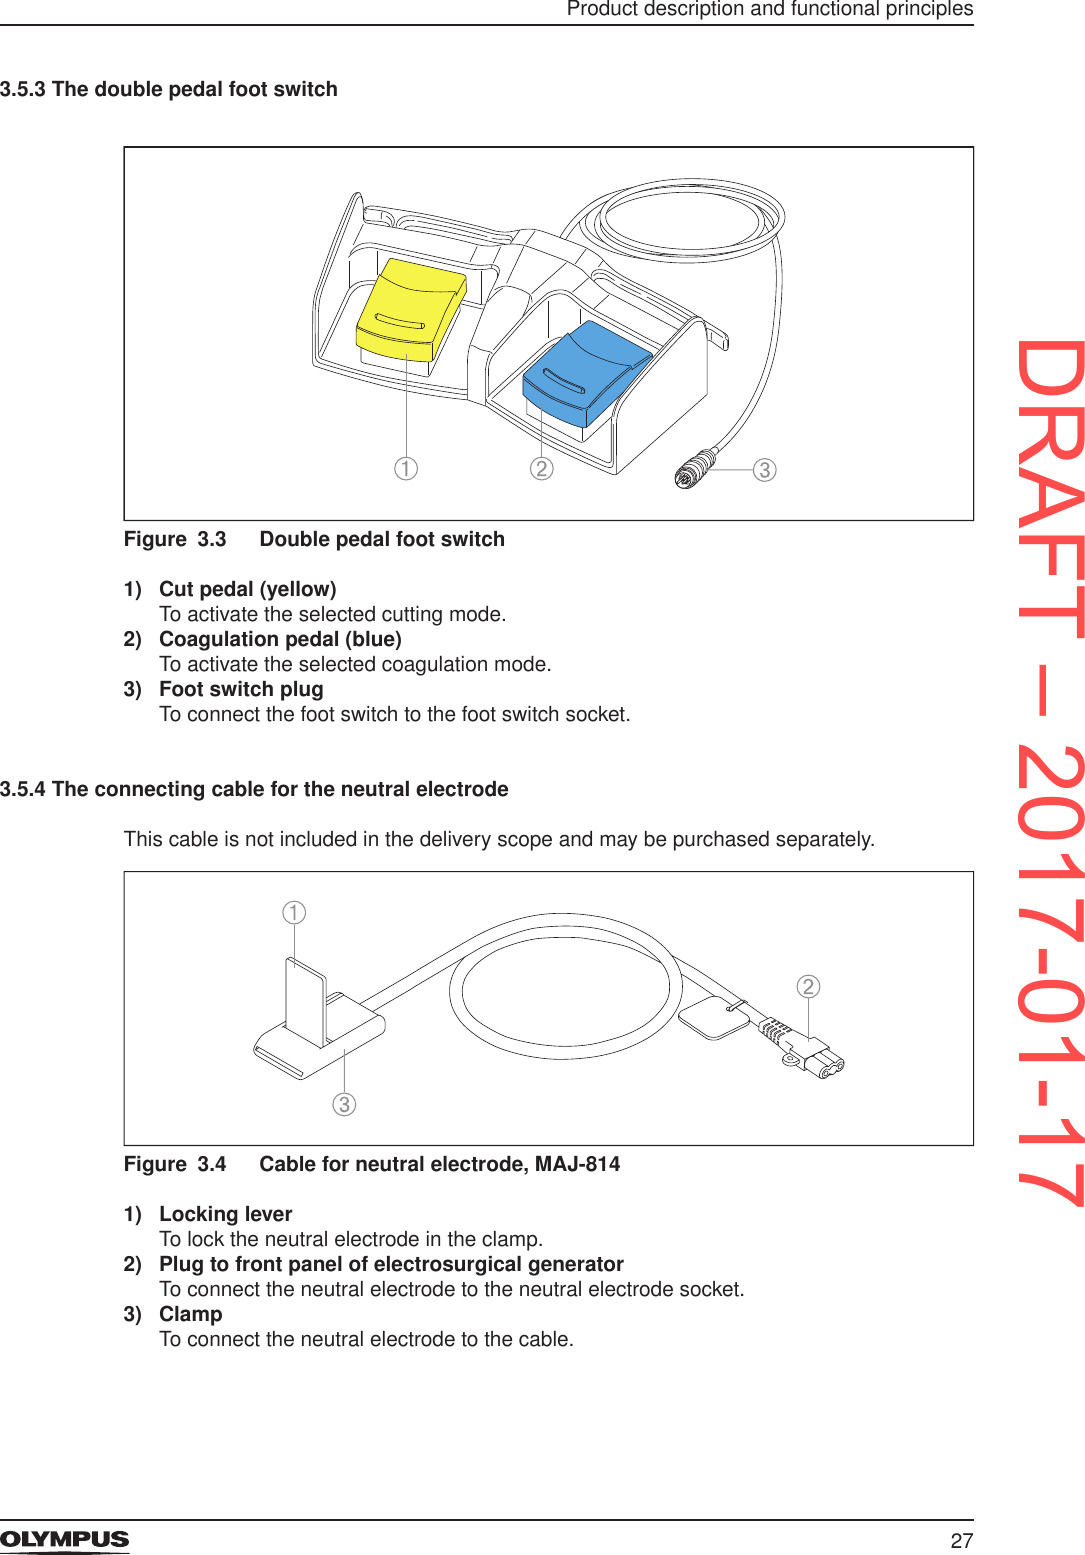 27Product description and functional principles3.5.3 The double pedal foot switchFigure 3.3  Double pedal foot switch1)  Cut pedal (yellow)To activate the selected cutting mode.2)  Coagulation pedal (blue)To activate the selected coagulation mode.3)  Foot switch plugTo connect the foot switch to the foot switch socket.3.5.4 The connecting cable for the neutral electrodeThis cable is not included in the delivery scope and may be purchased separately.Figure 3.4  Cable for neutral electrode, MAJ-8141)  Locking leverTo lock the neutral electrode in the clamp.2)  Plug to front panel of electrosurgical generatorTo connect the neutral electrode to the neutral electrode socket.3)  ClampTo connect the neutral electrode to the cable.DRAFT – 2017-01-17